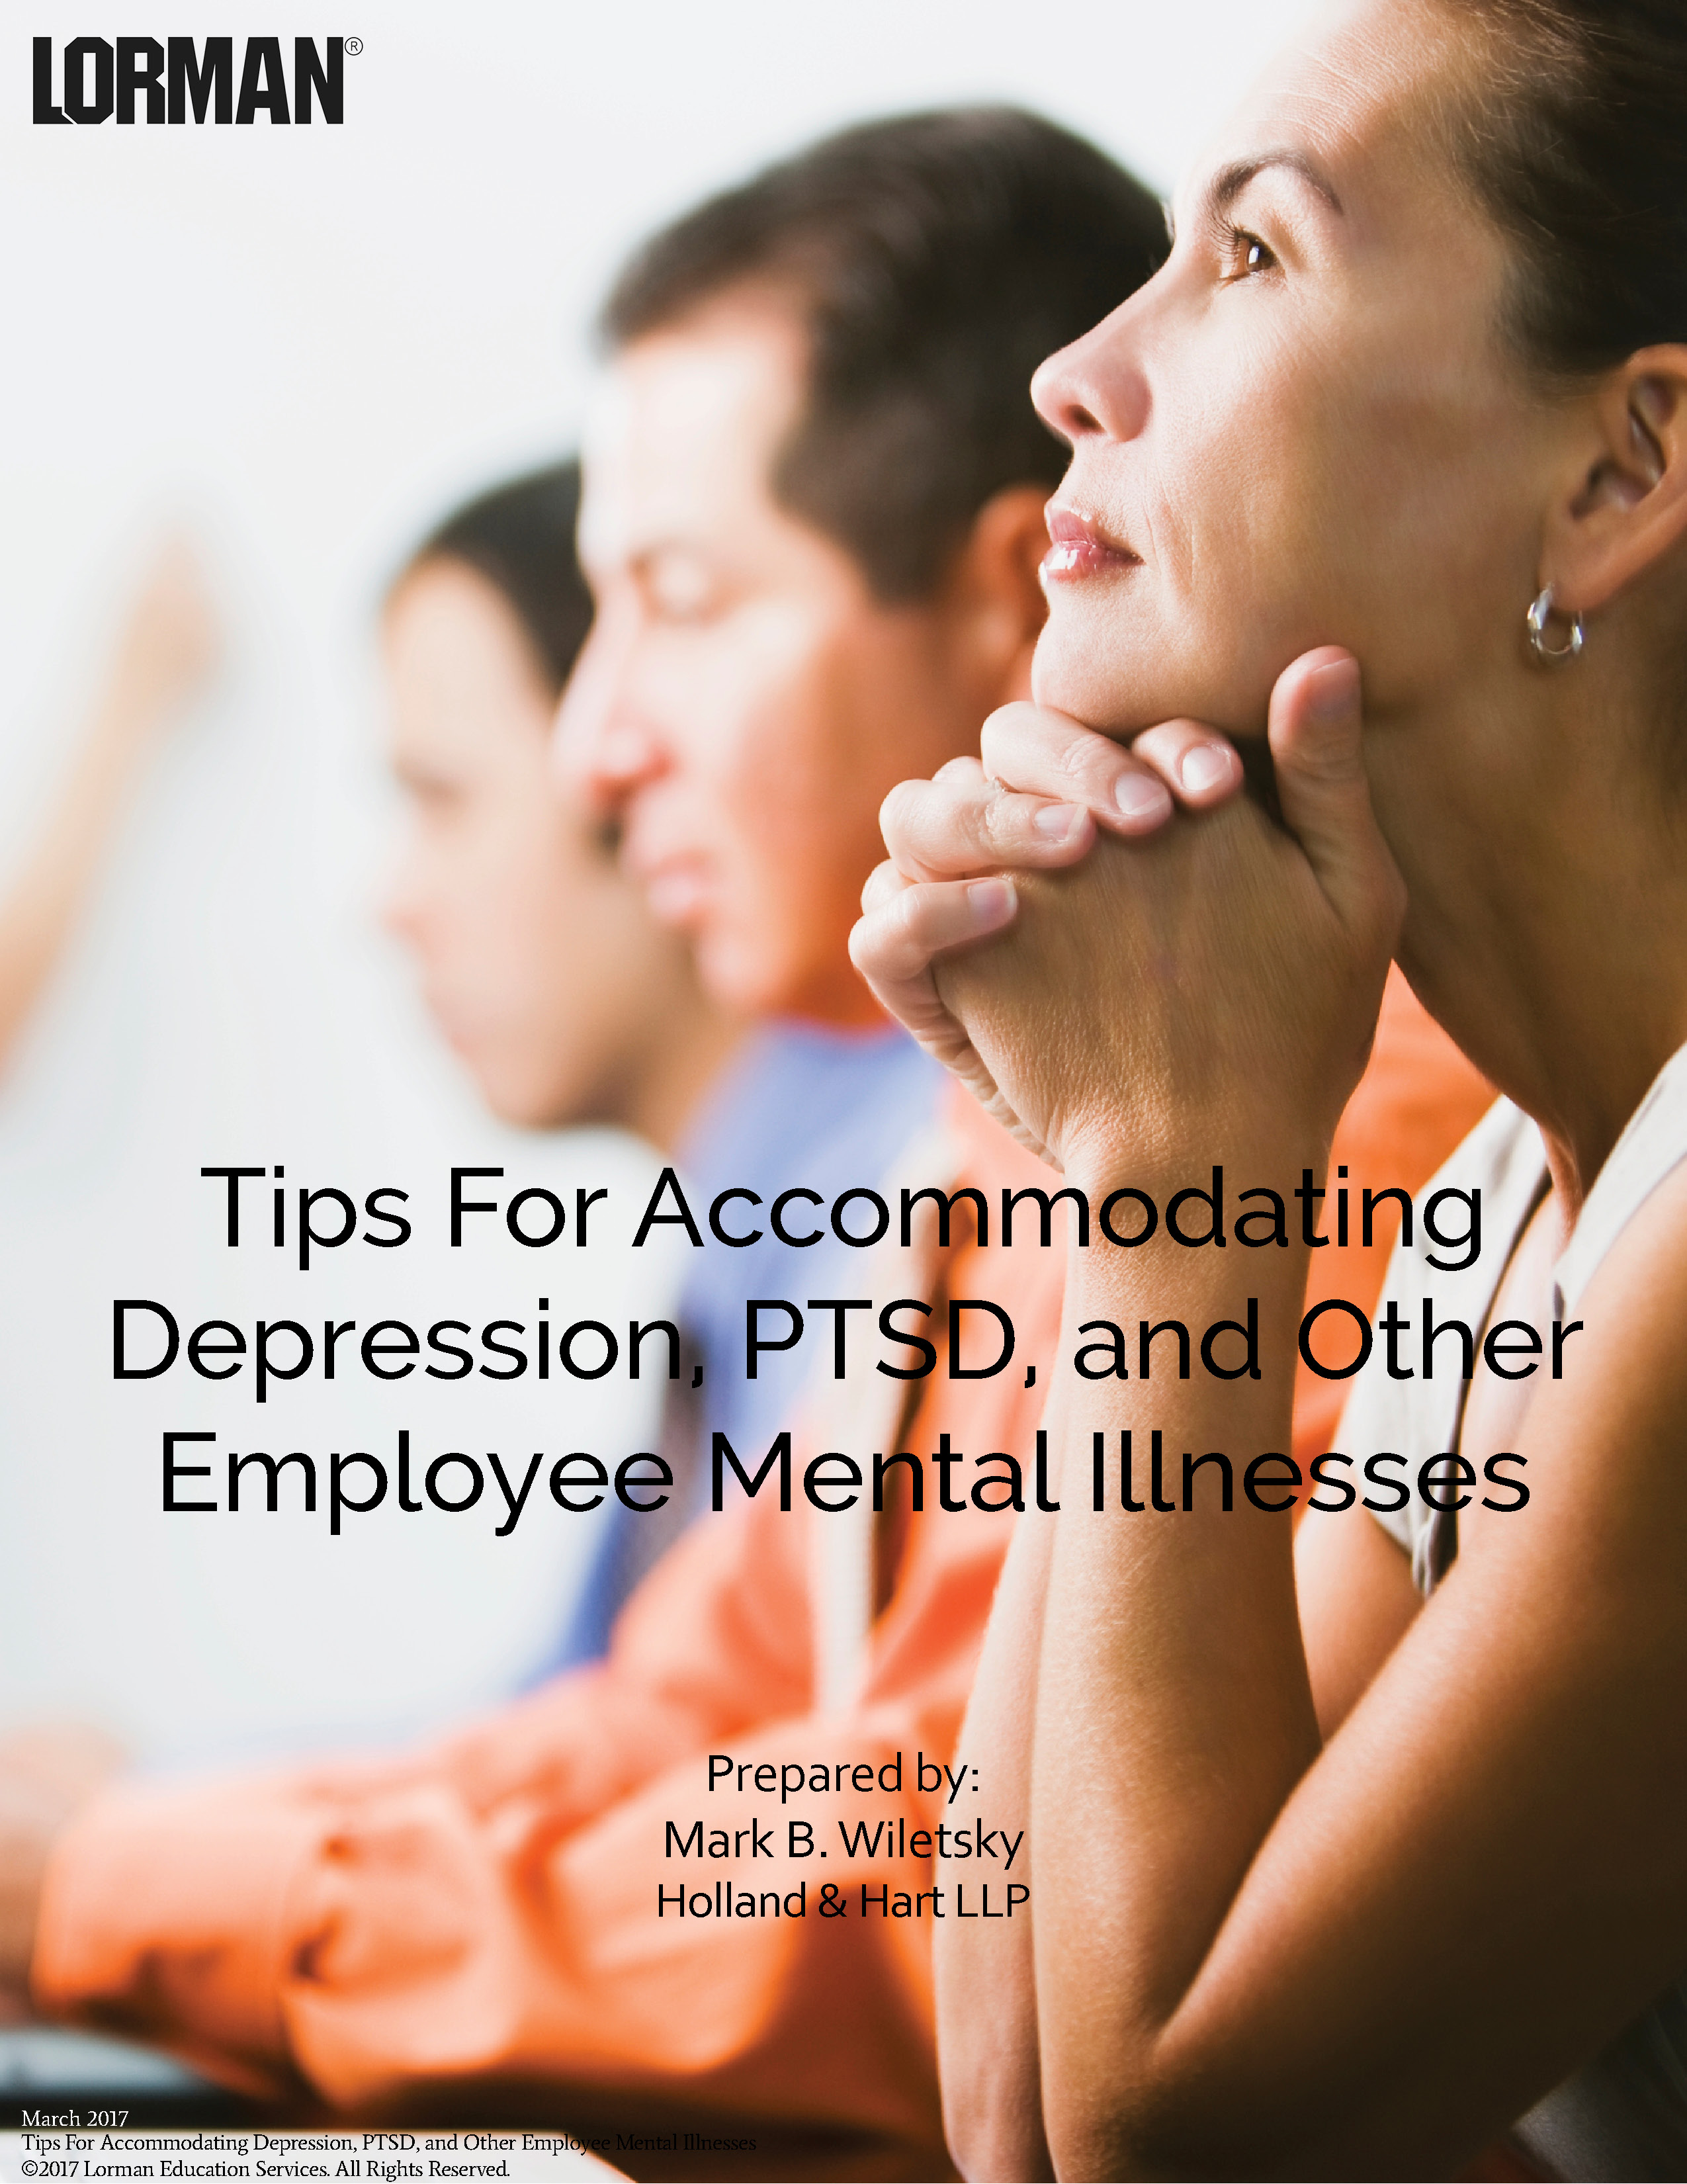 Tips For Accommodating Depression, PTSD, and Other Employee Mental Illnesses